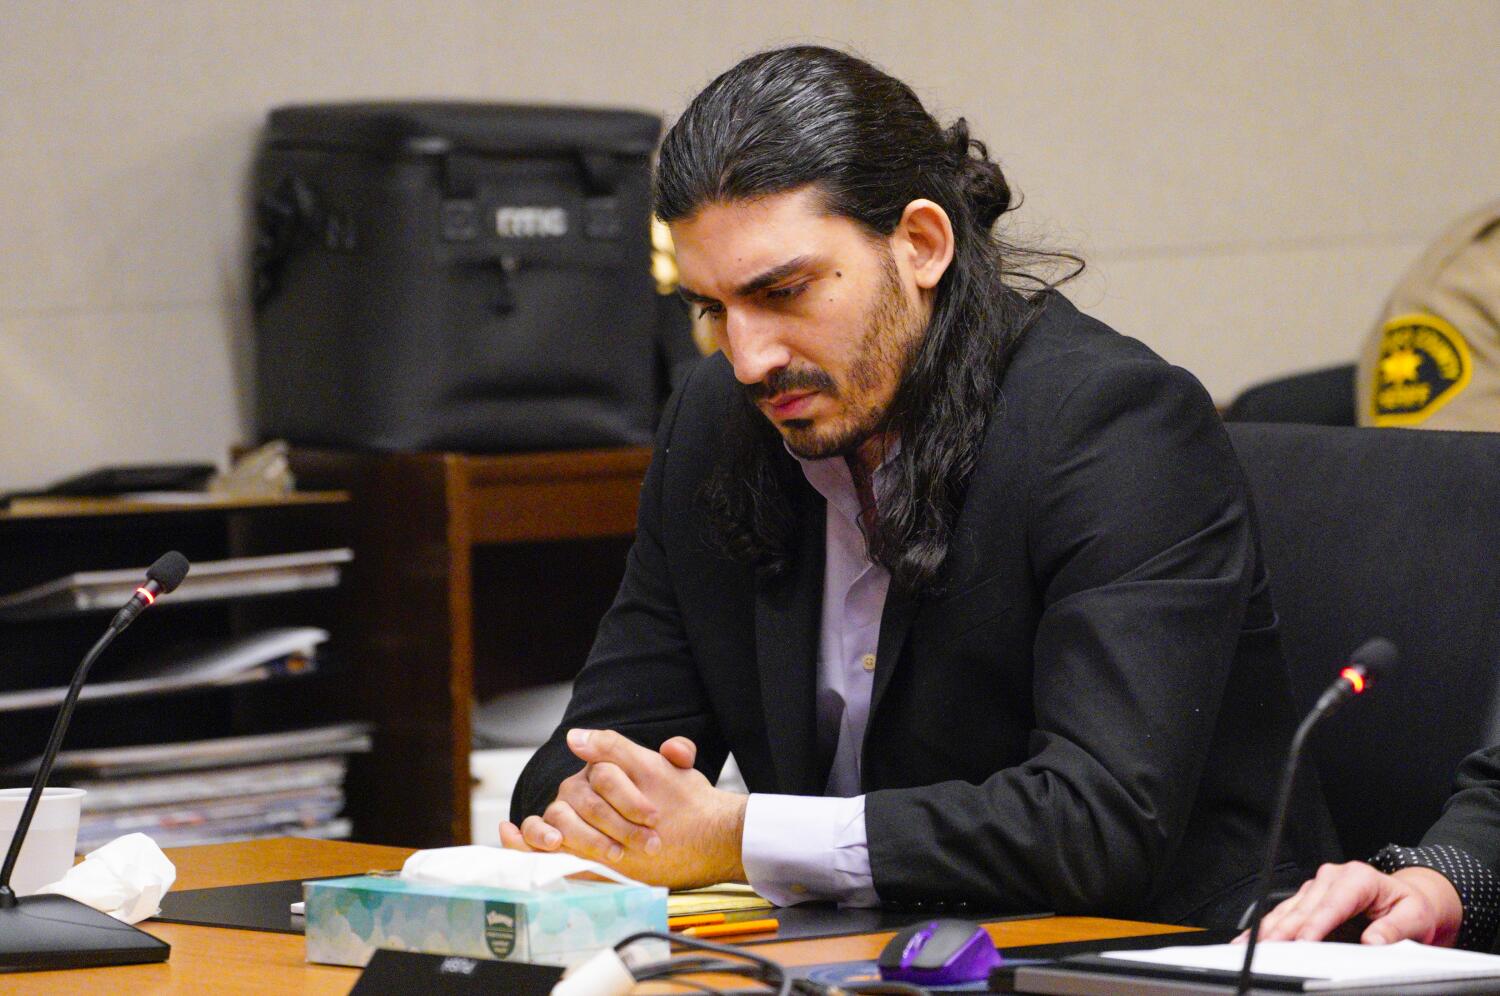 trial-starts-for-tiktok-star-accused-of-killing-wife-and-her-friend-in-san-diego-high-rise